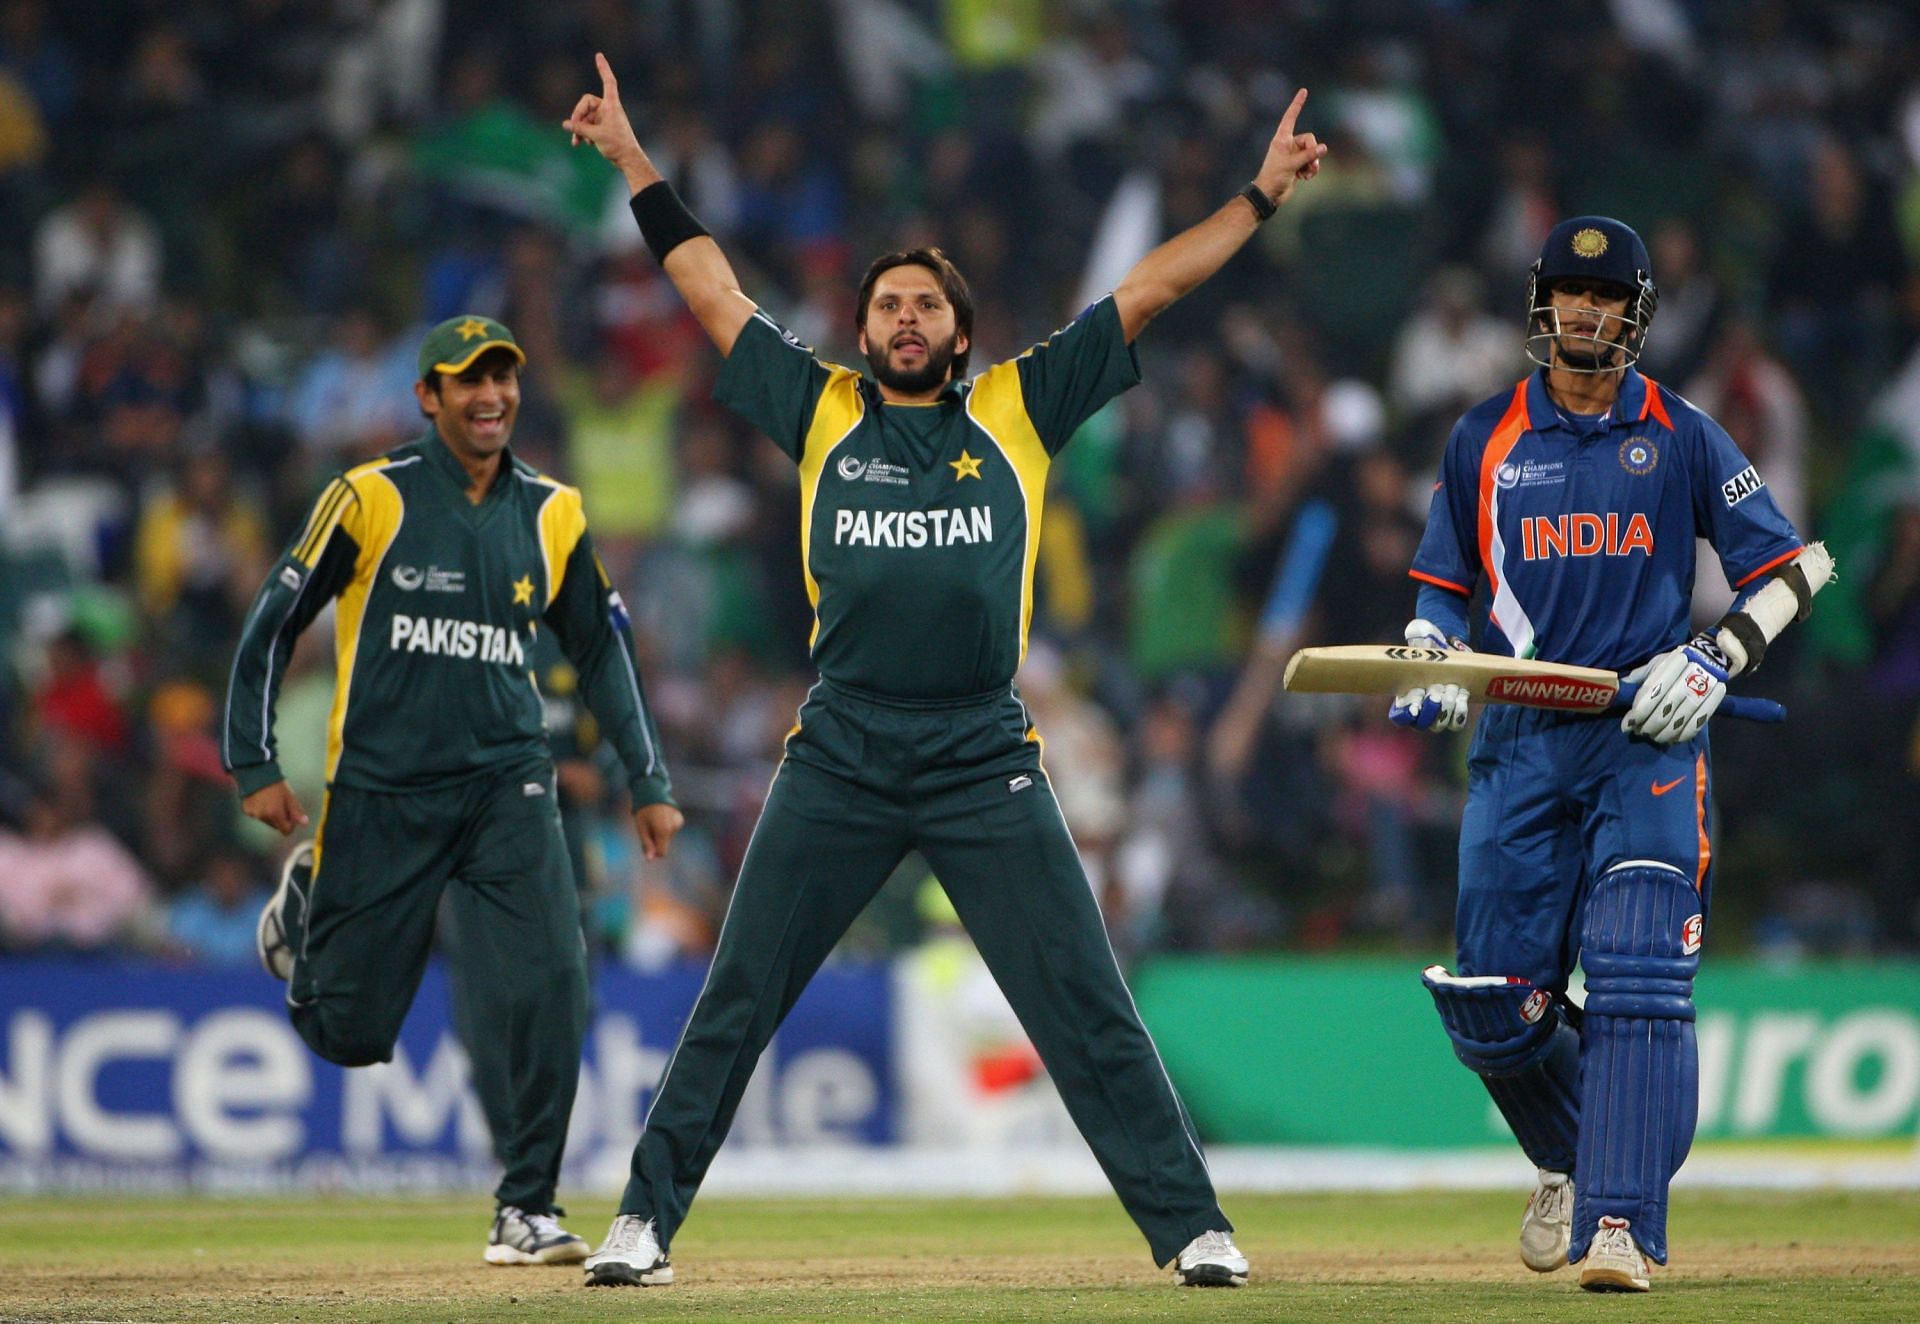 Shahid Afridi reacts after taking a wicket against India. Pic: Getty Images